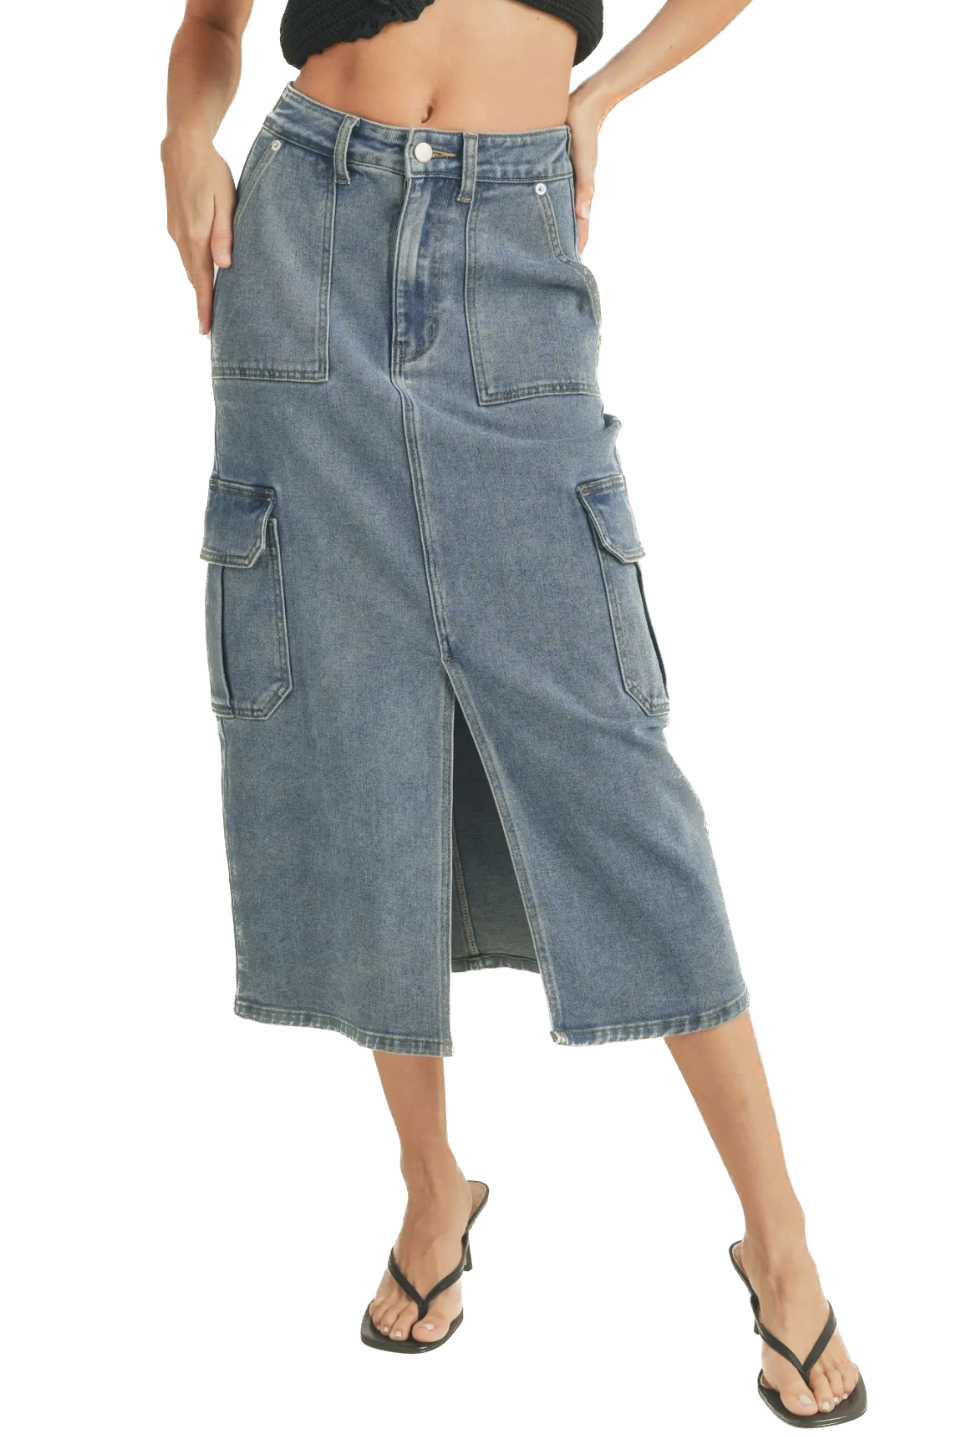 Keeping Tabs Denim Cargo Skirt  Body contour knit skirt with side slit   Material: 54% Cotton, 37% Polyester, 8% Viscose, 1% Spandex